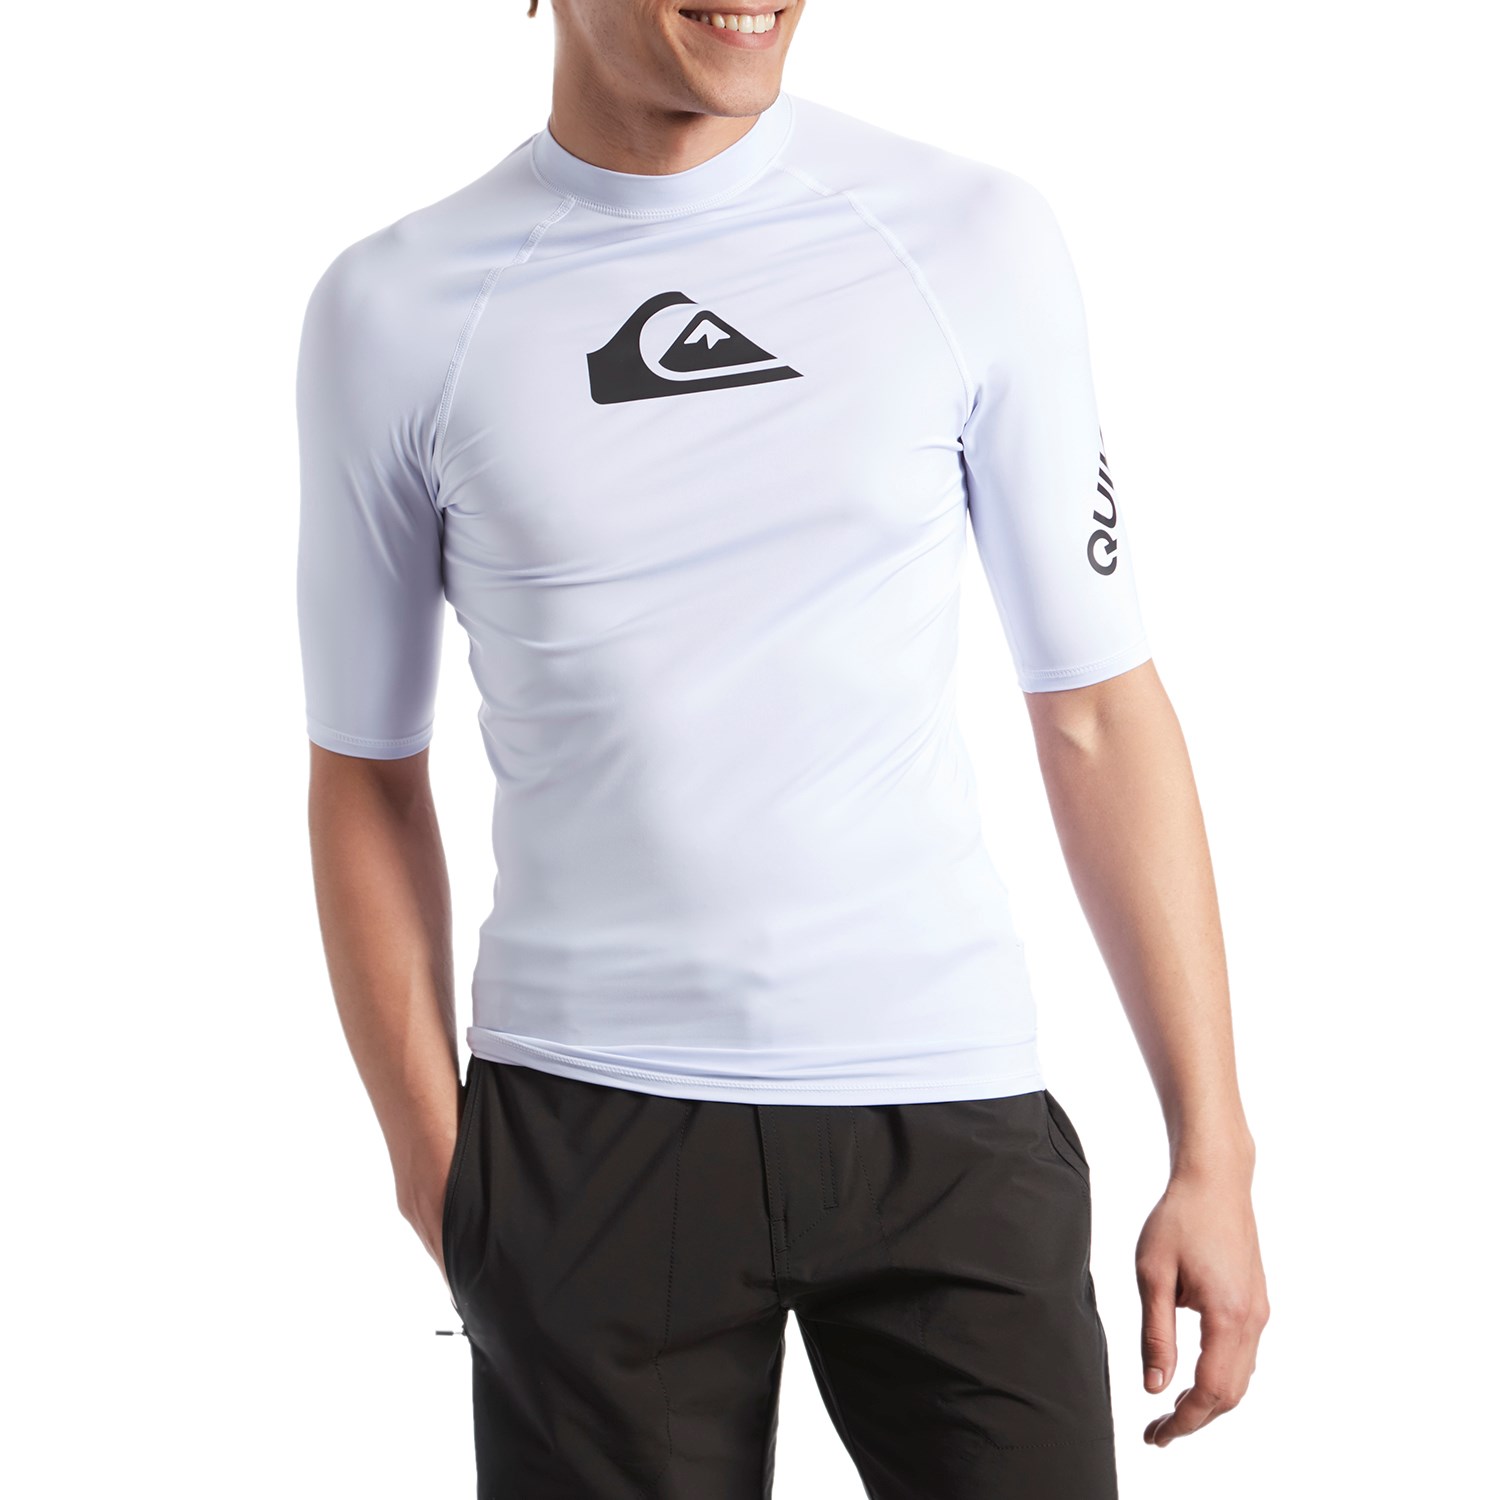 Wettie Essential s Short Sleeve T-Shirt Surfdome Men Clothing T-shirts Short Sleeved T-Shirts 